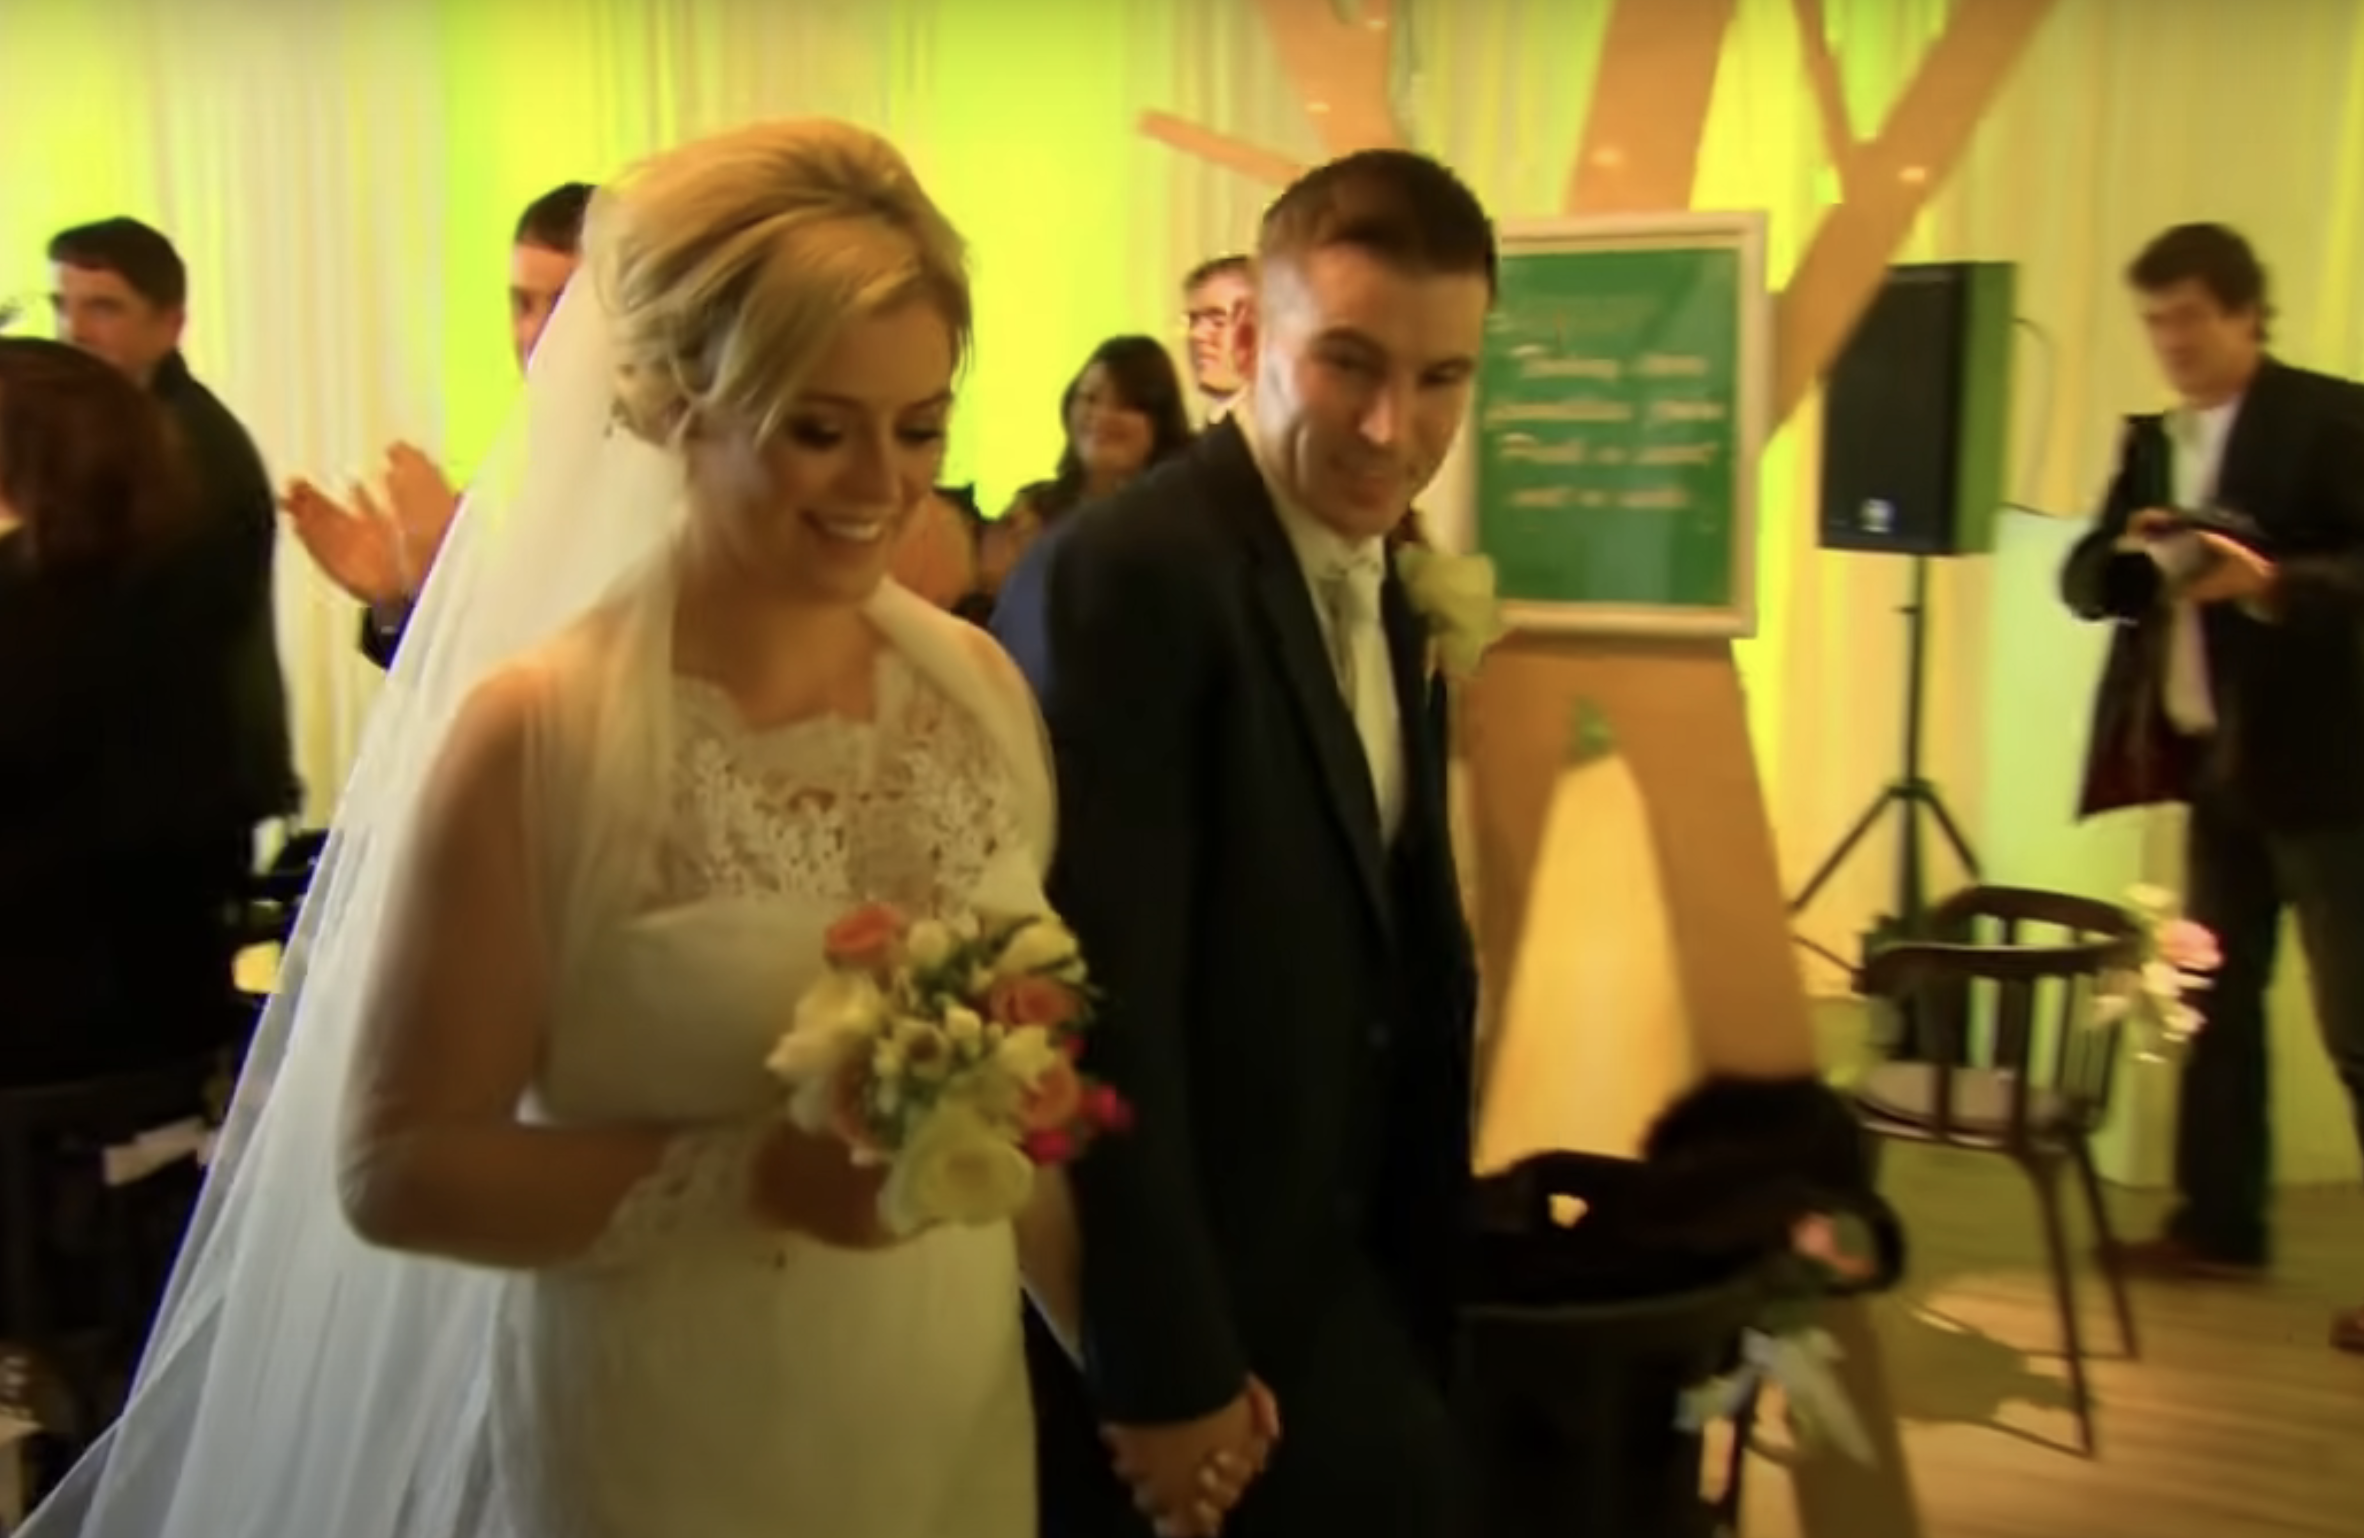 A bride and groom smiling